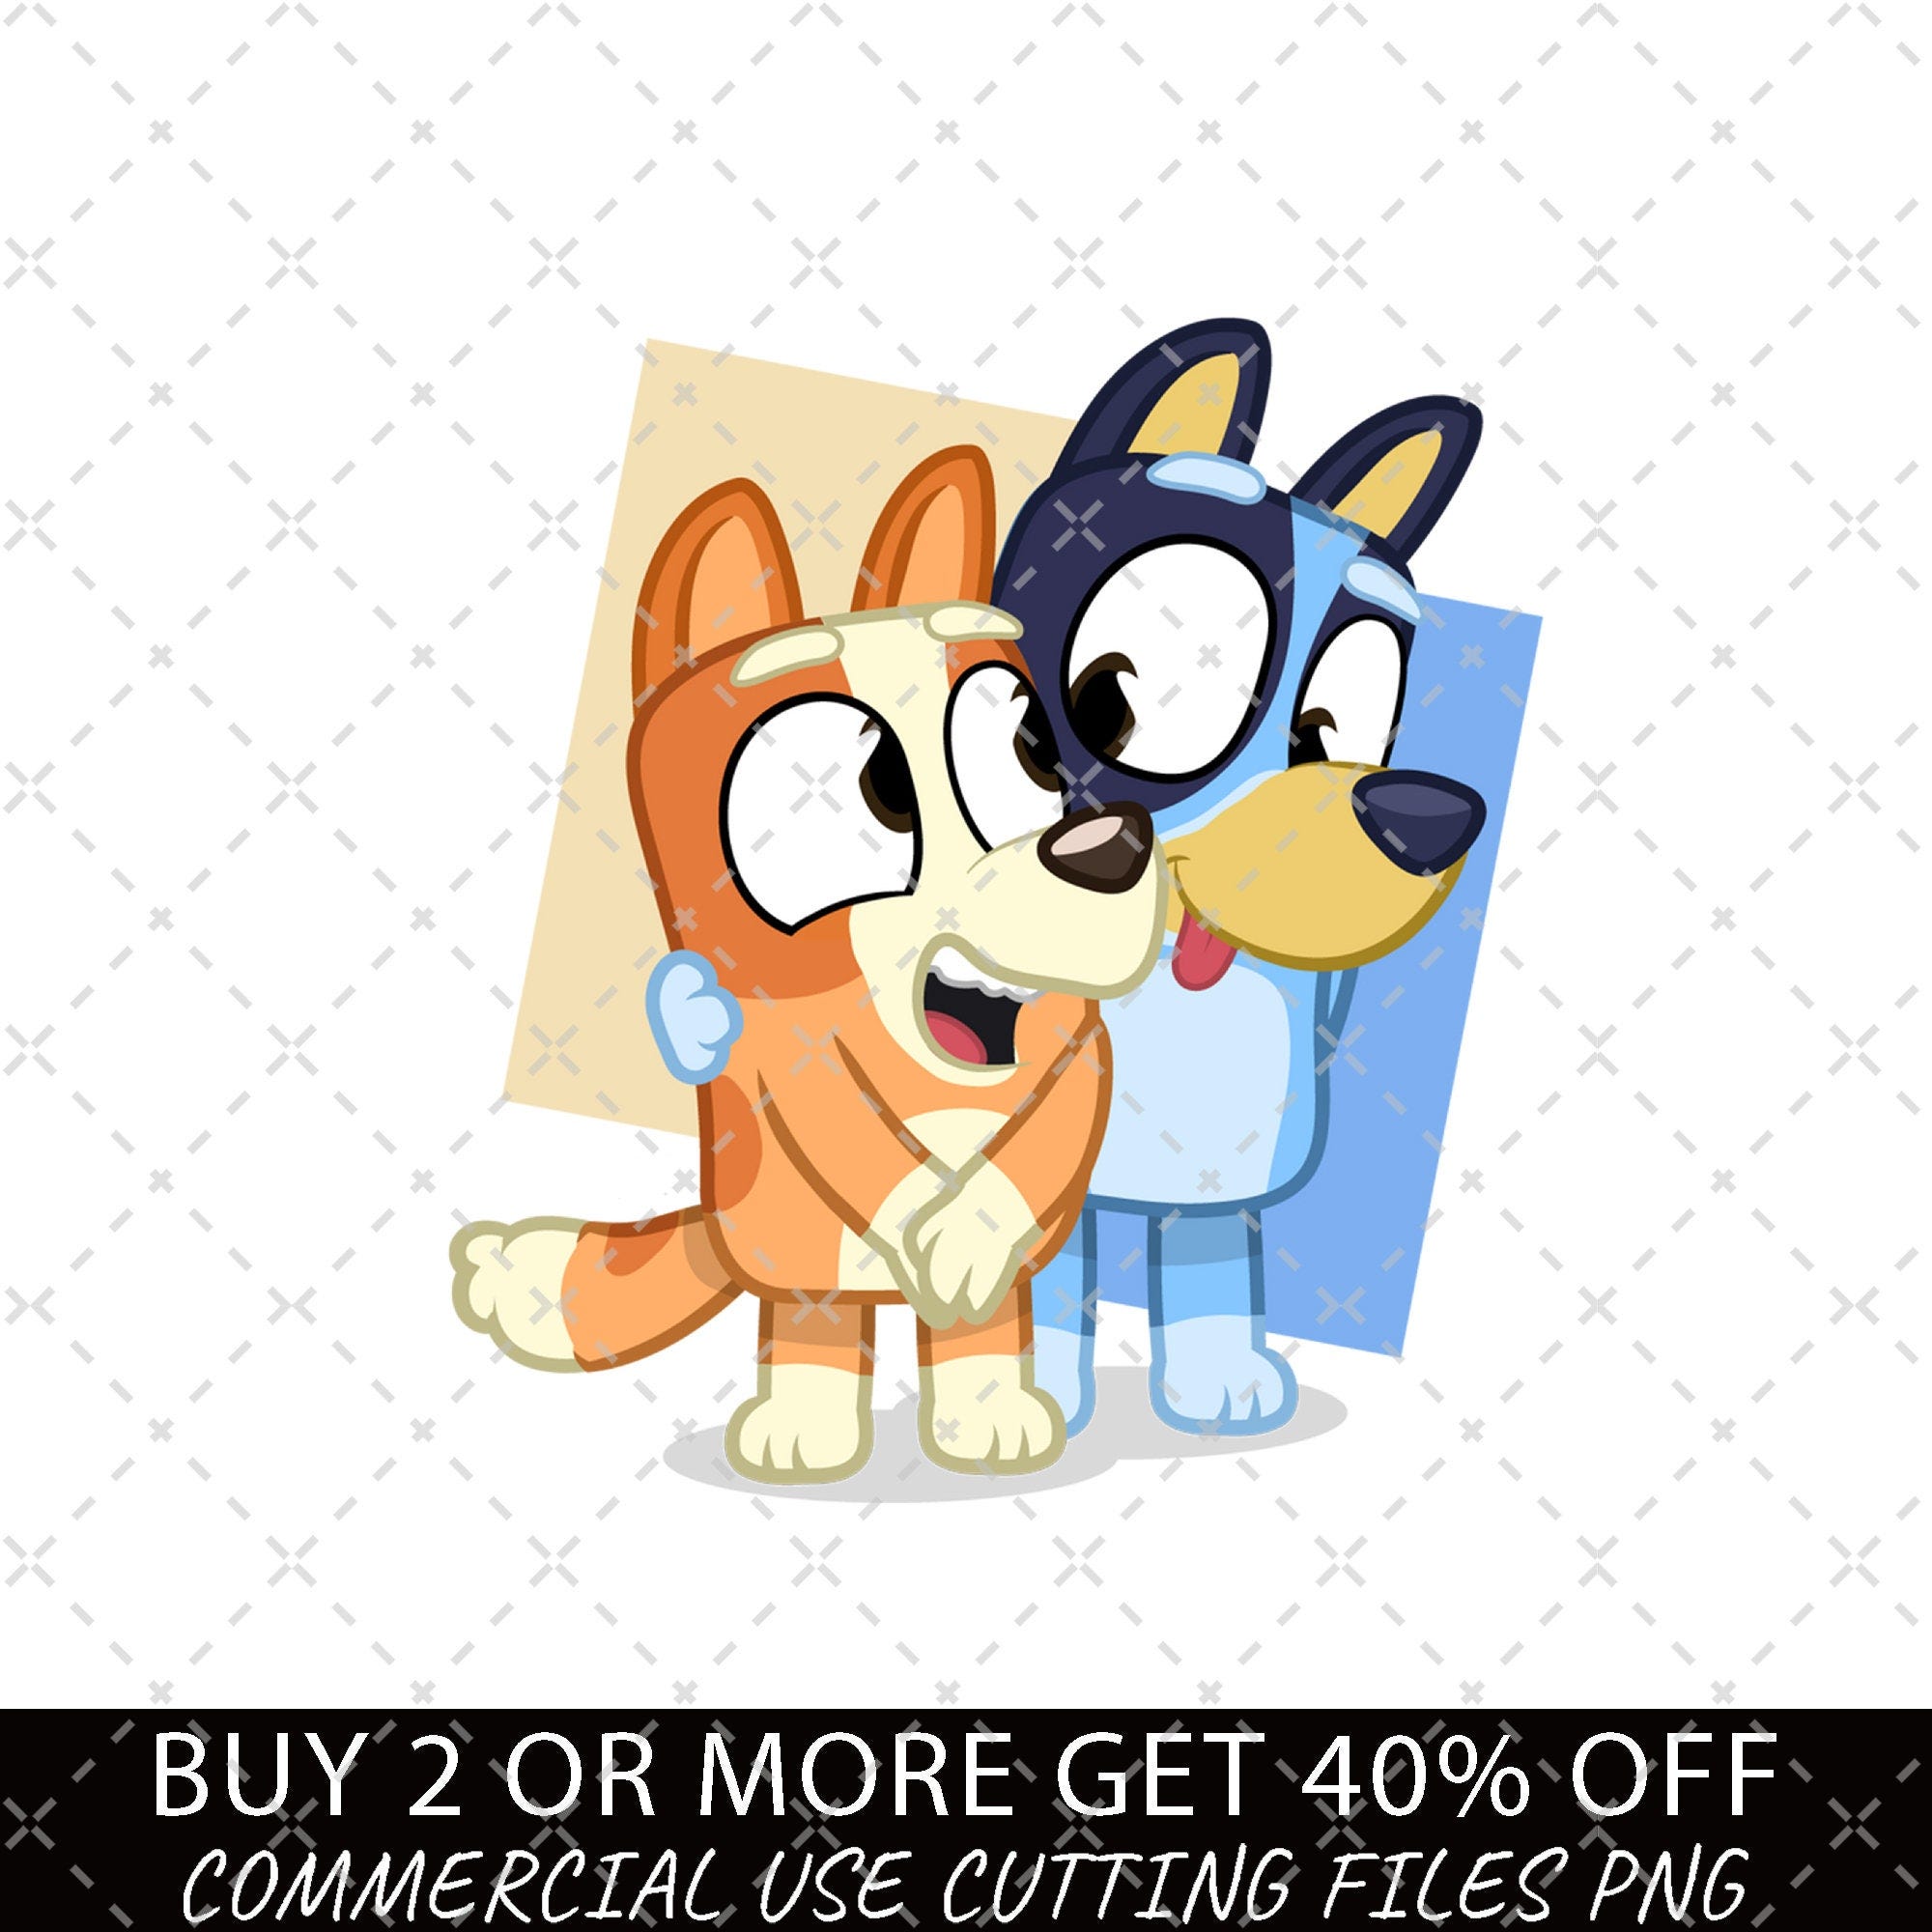 Bluey and Bingo Png, Bluey Friends Instant Download Png, Ready to Print Bluey Png File, Bluey And Friends Digital Png